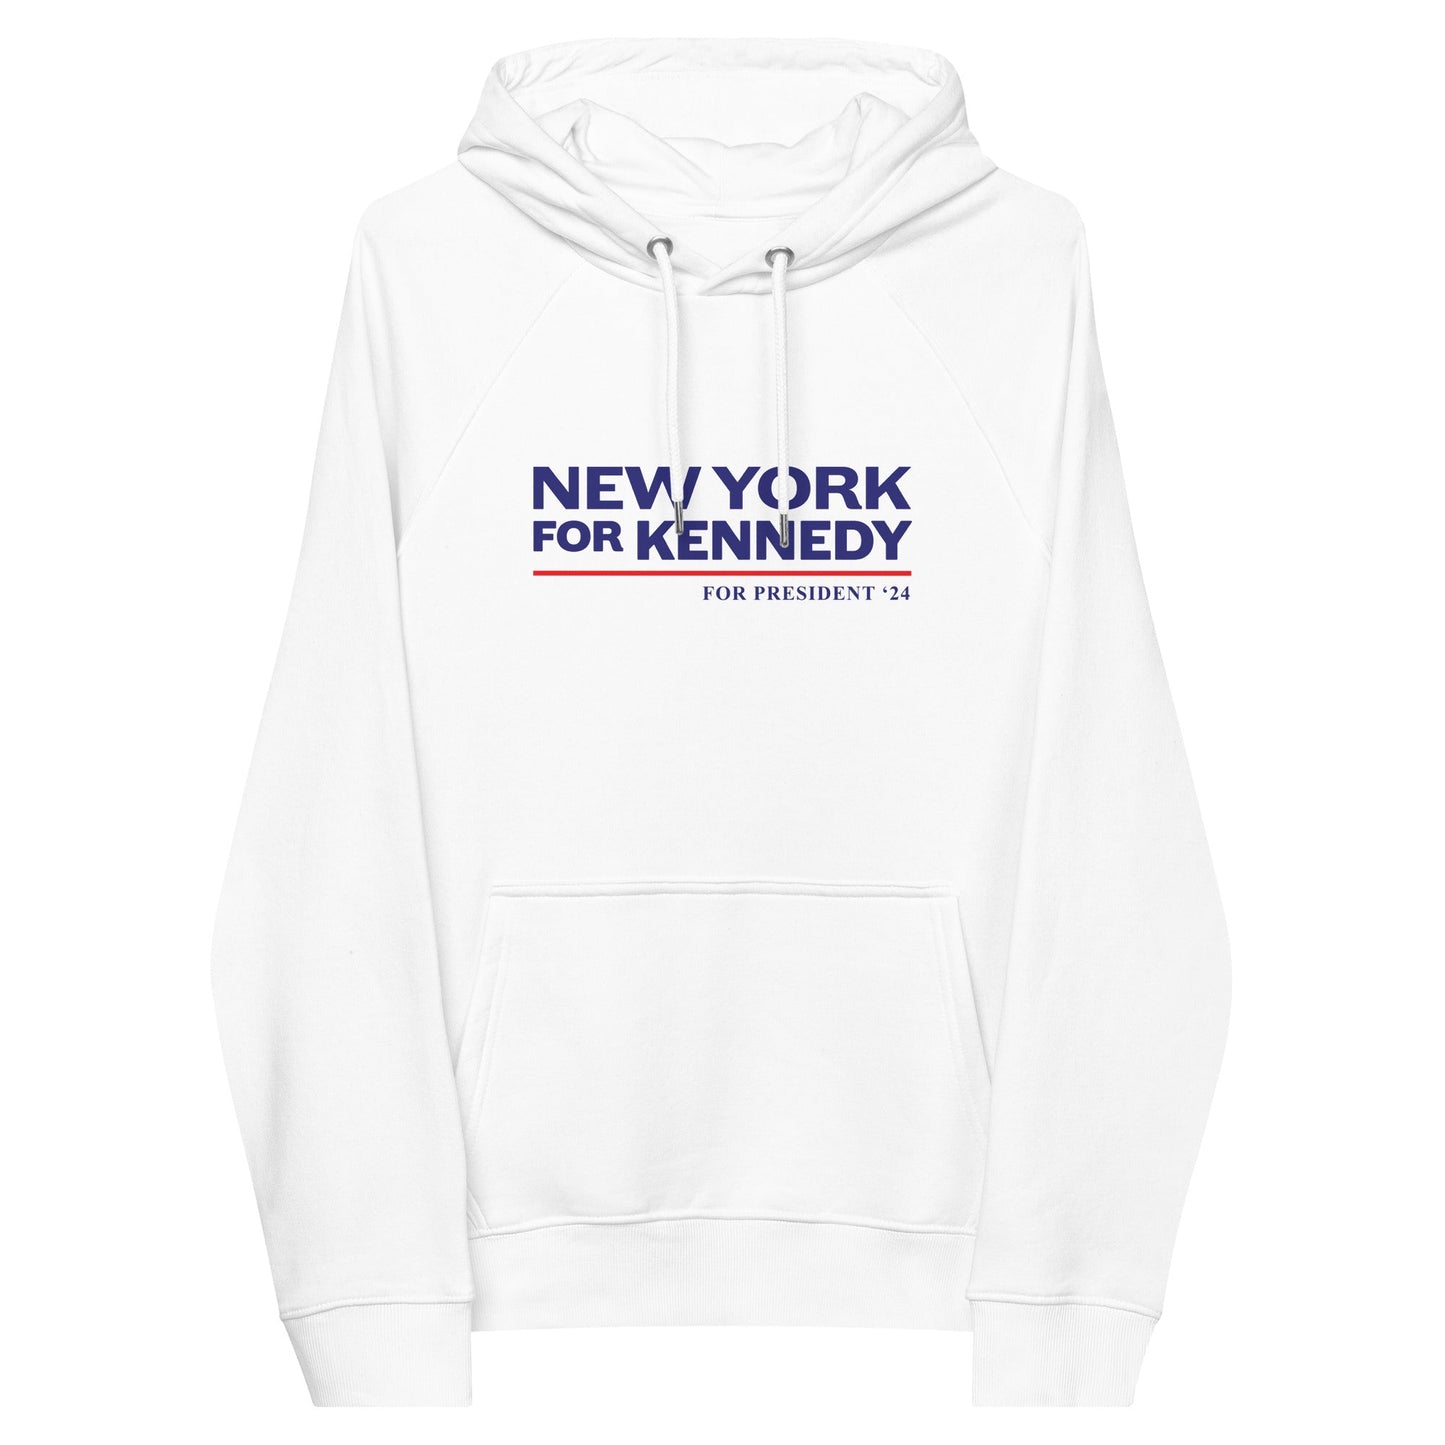 New York for Kennedy Unisex Hoodie - TEAM KENNEDY. All rights reserved